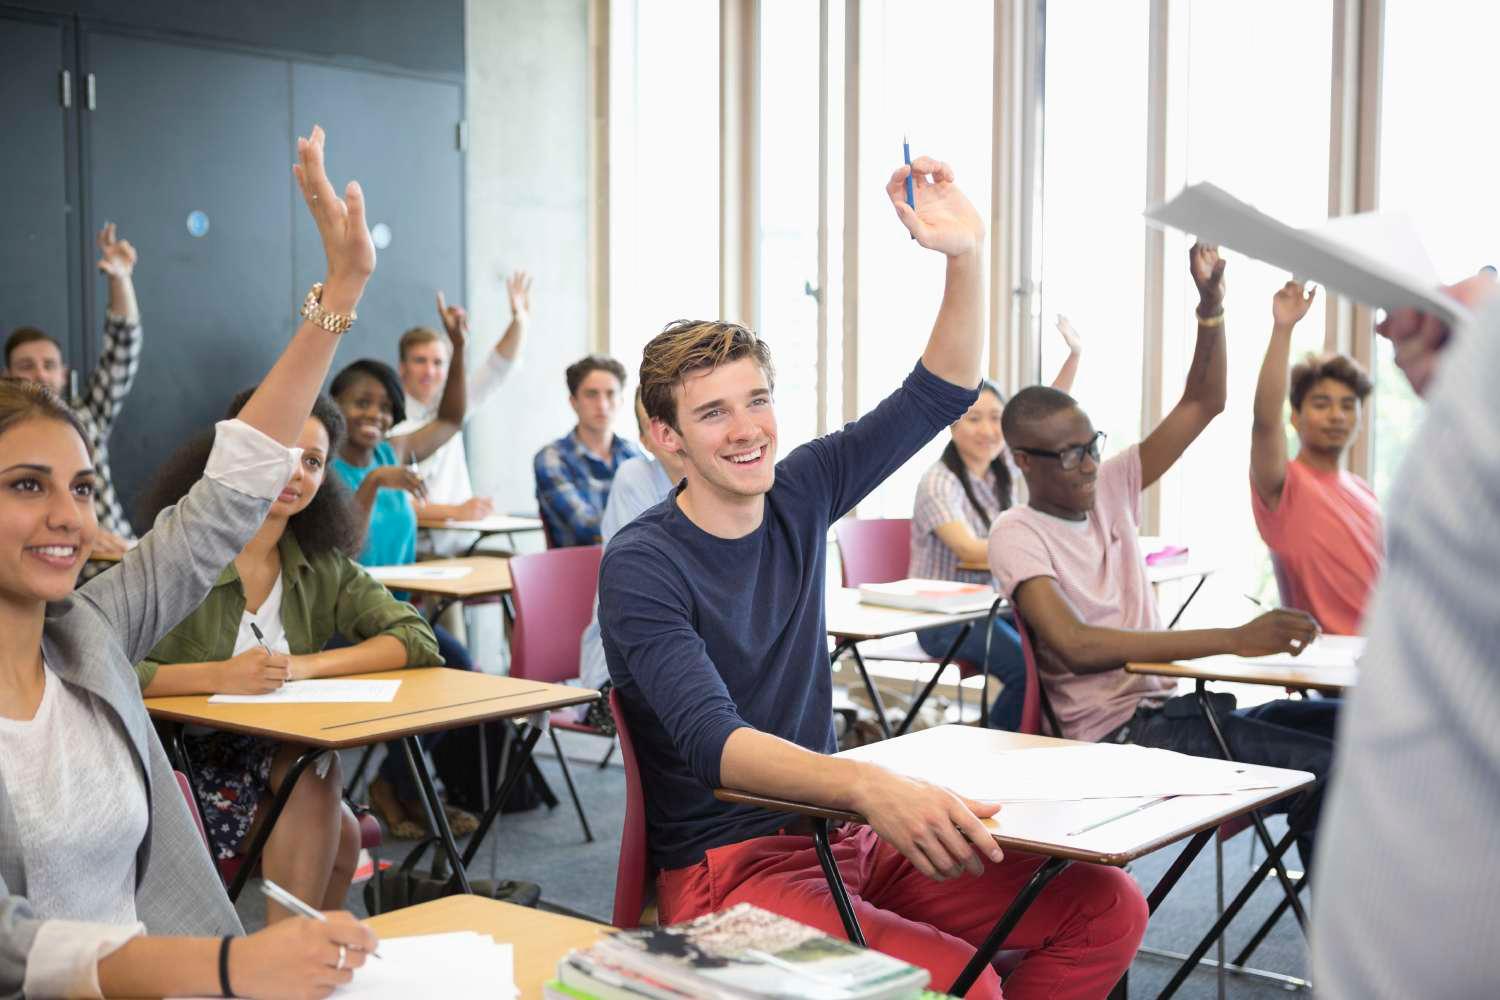 Smiling students sitting at desks in classroom with arms raised